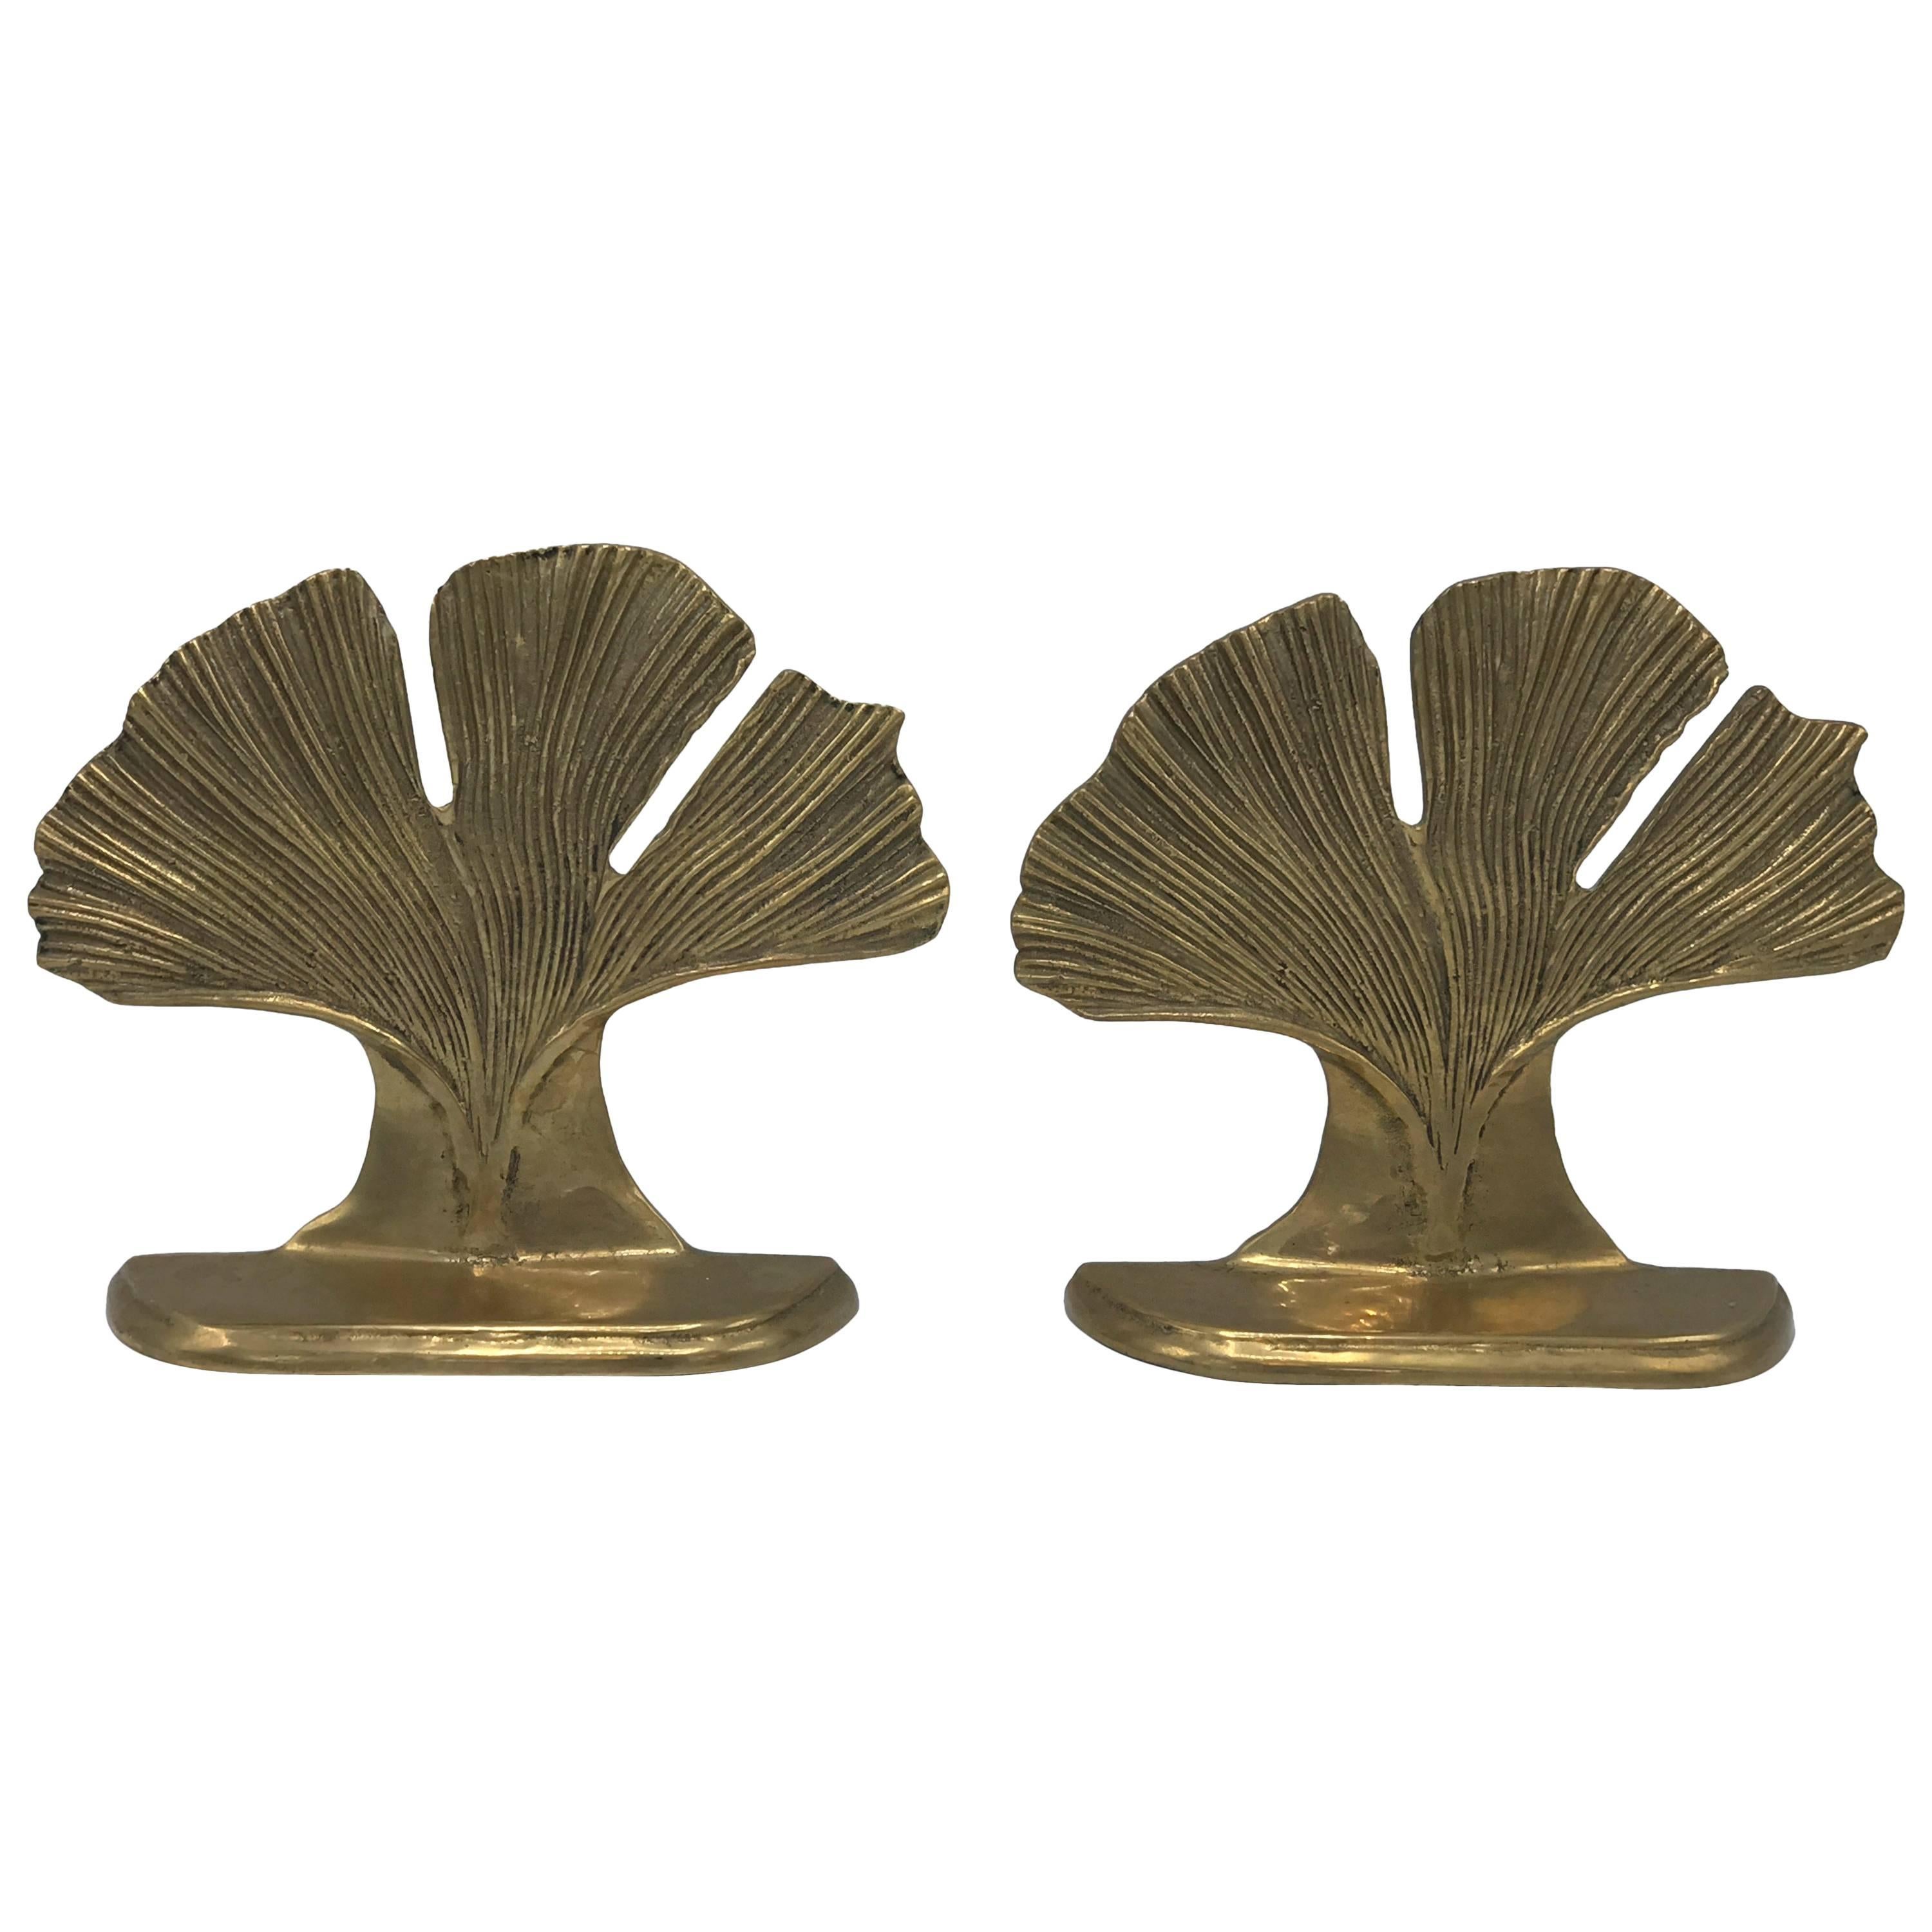 1960s Brass Ginkgo Leaf Bookends, Pair